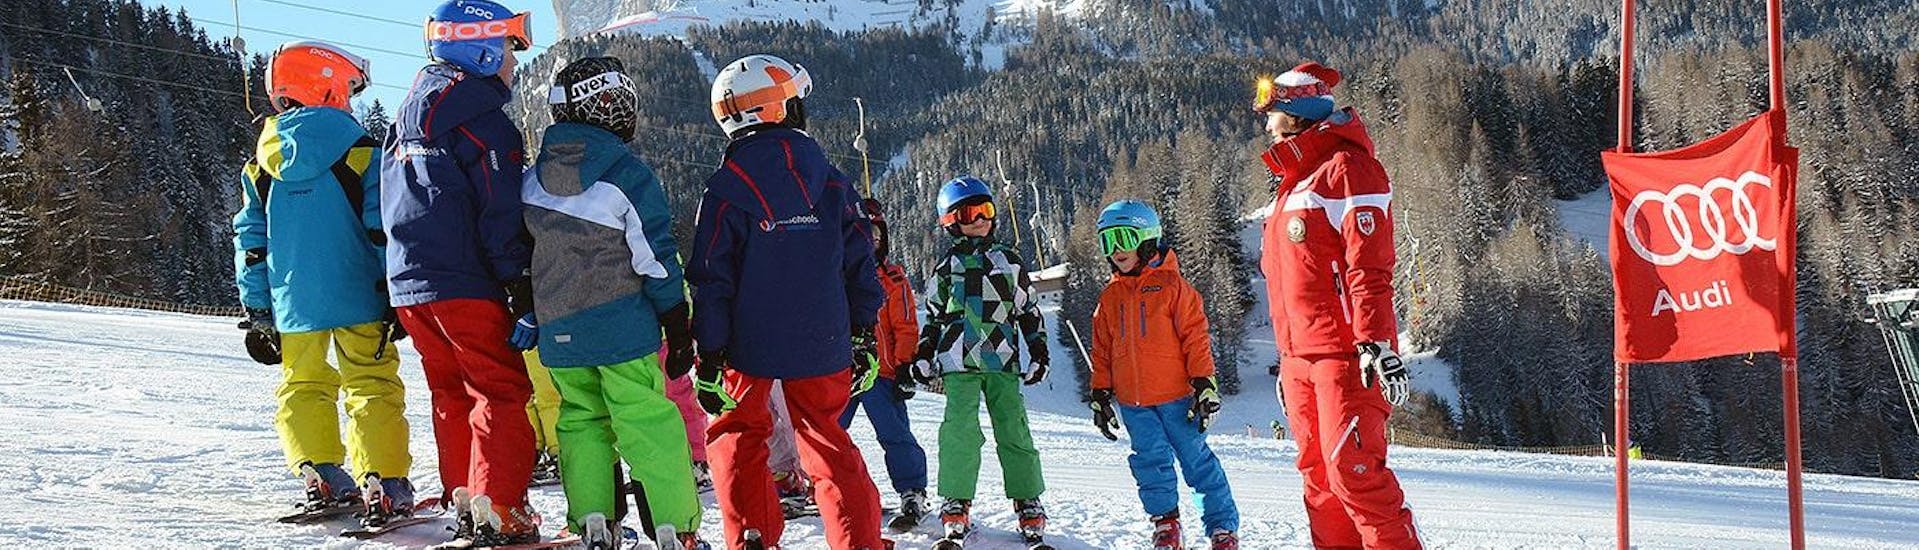 Ski instructor giving the young participants the last tips before the race. These kids ski lessons for advanced skiers are ideal in Selva di Val Gardena.